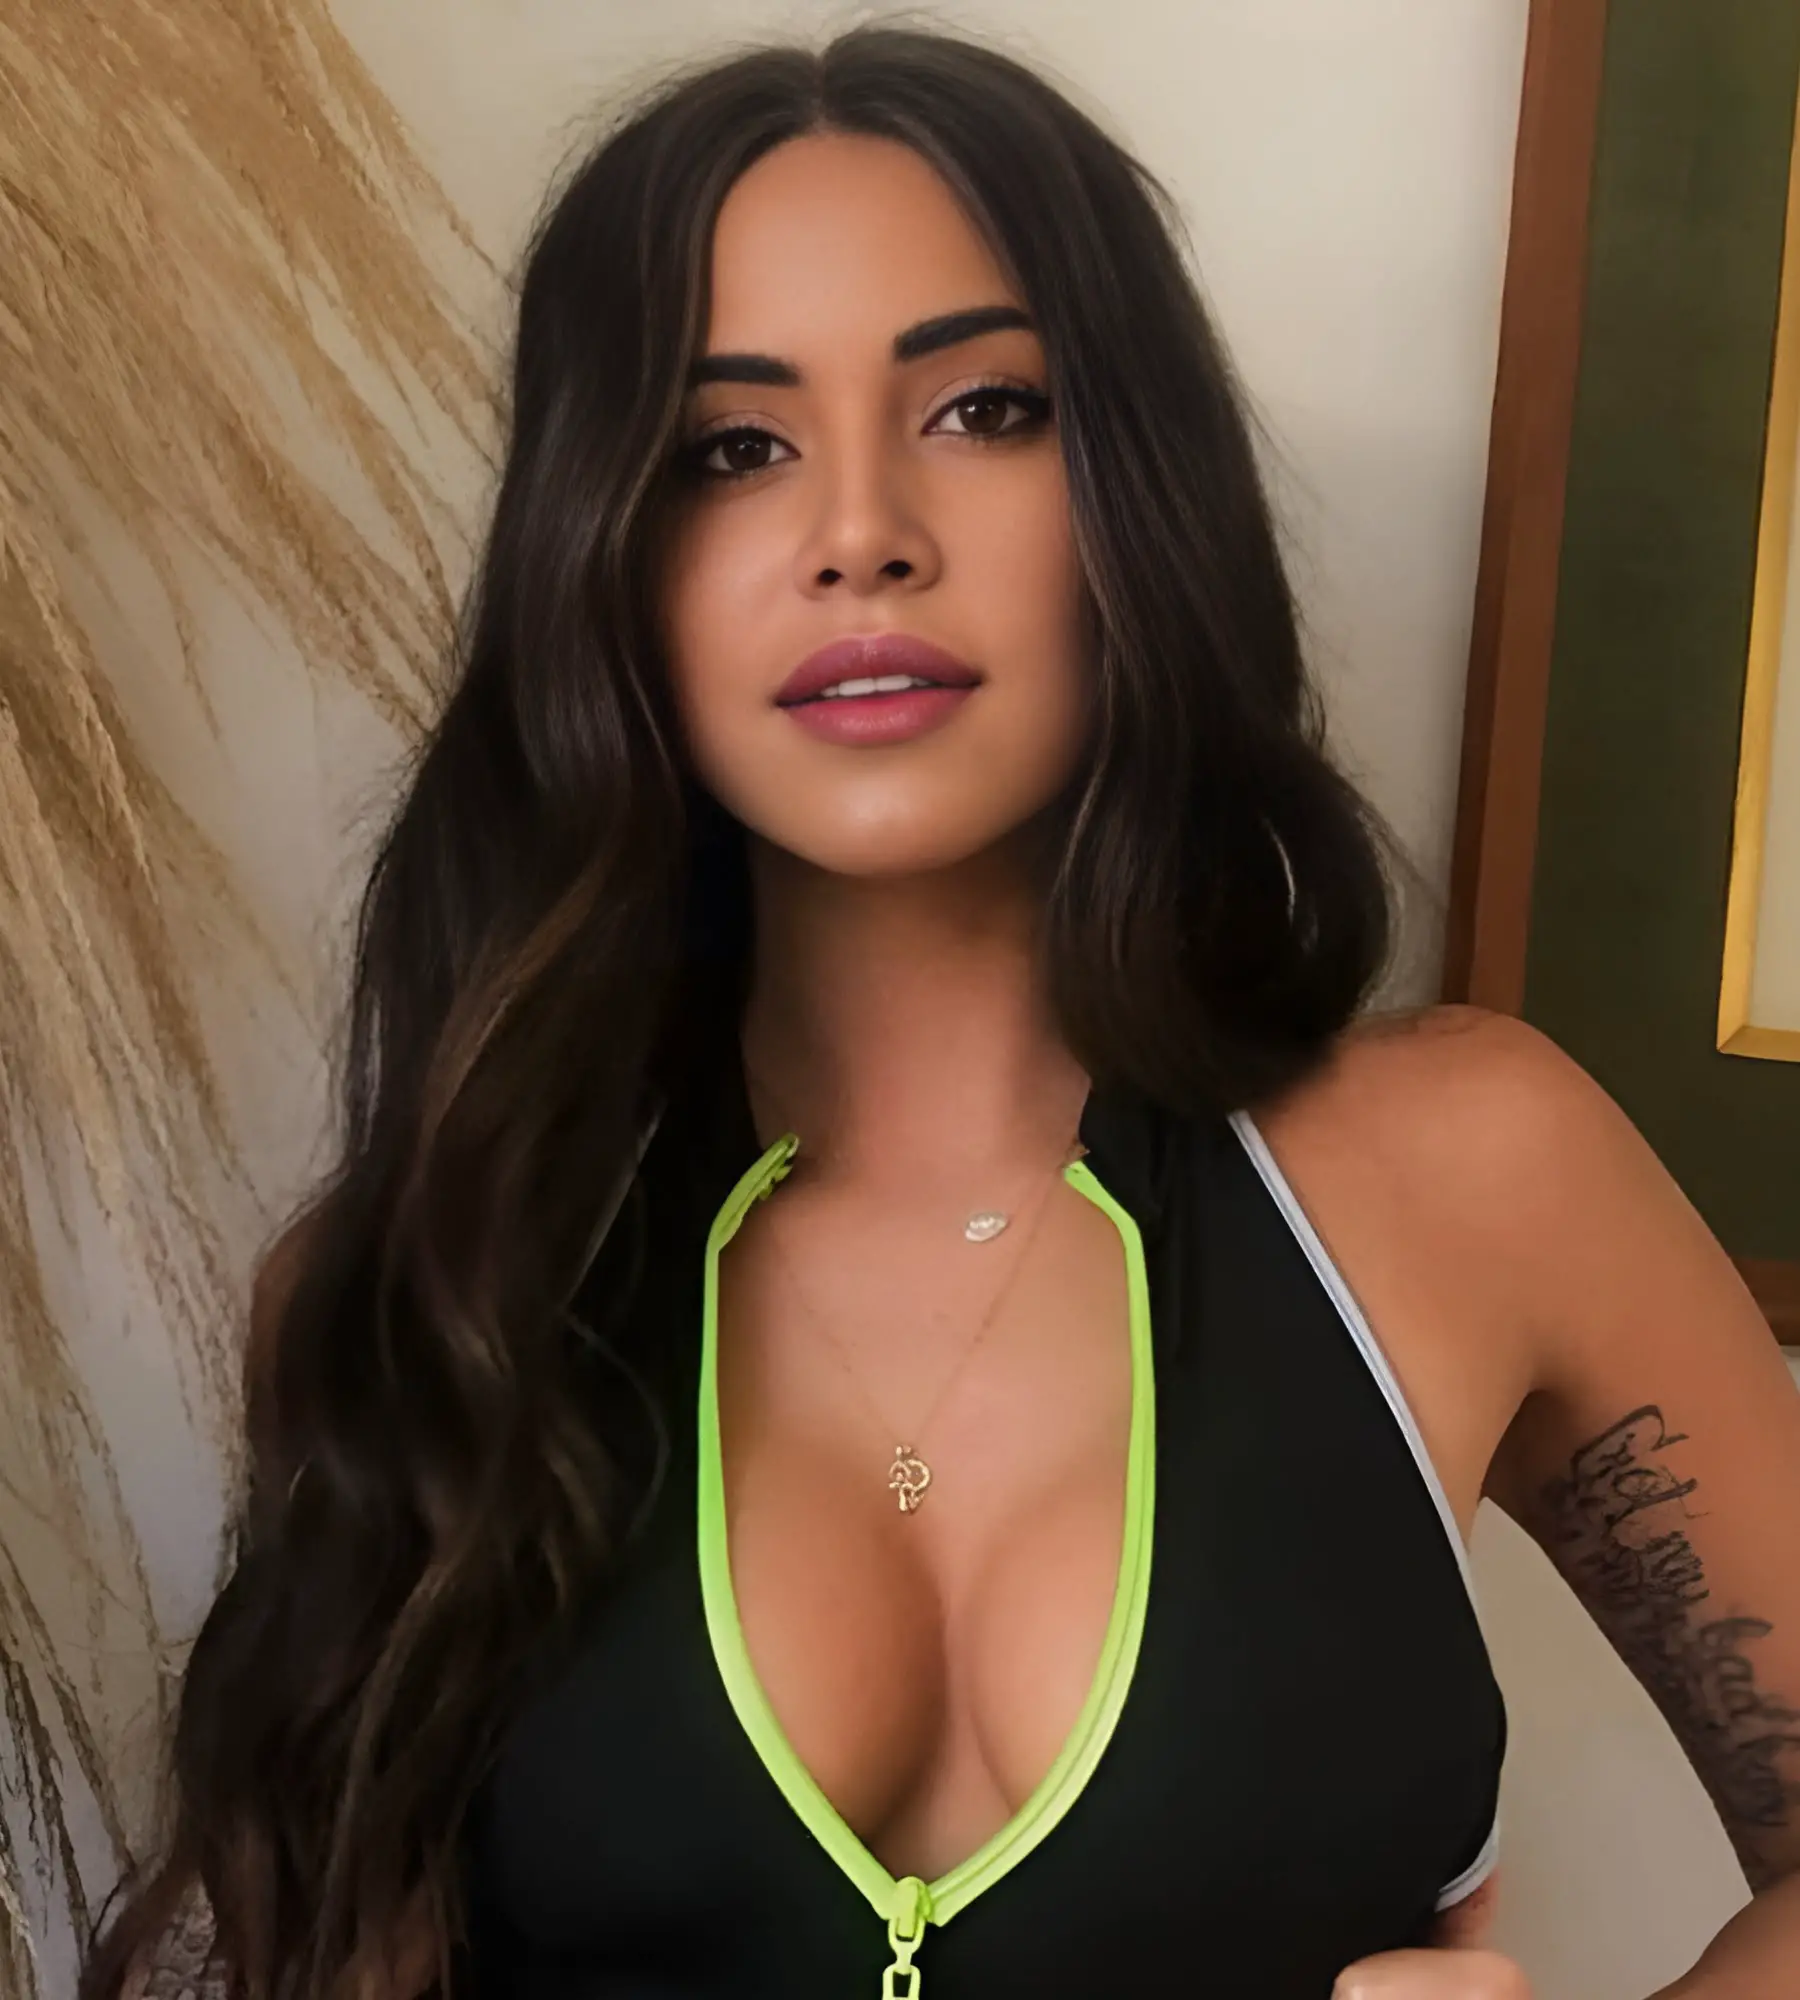 Suttin (Model) Age, Height, Weight, Wiki, Biography, Boyfriend, Ethnicity and More